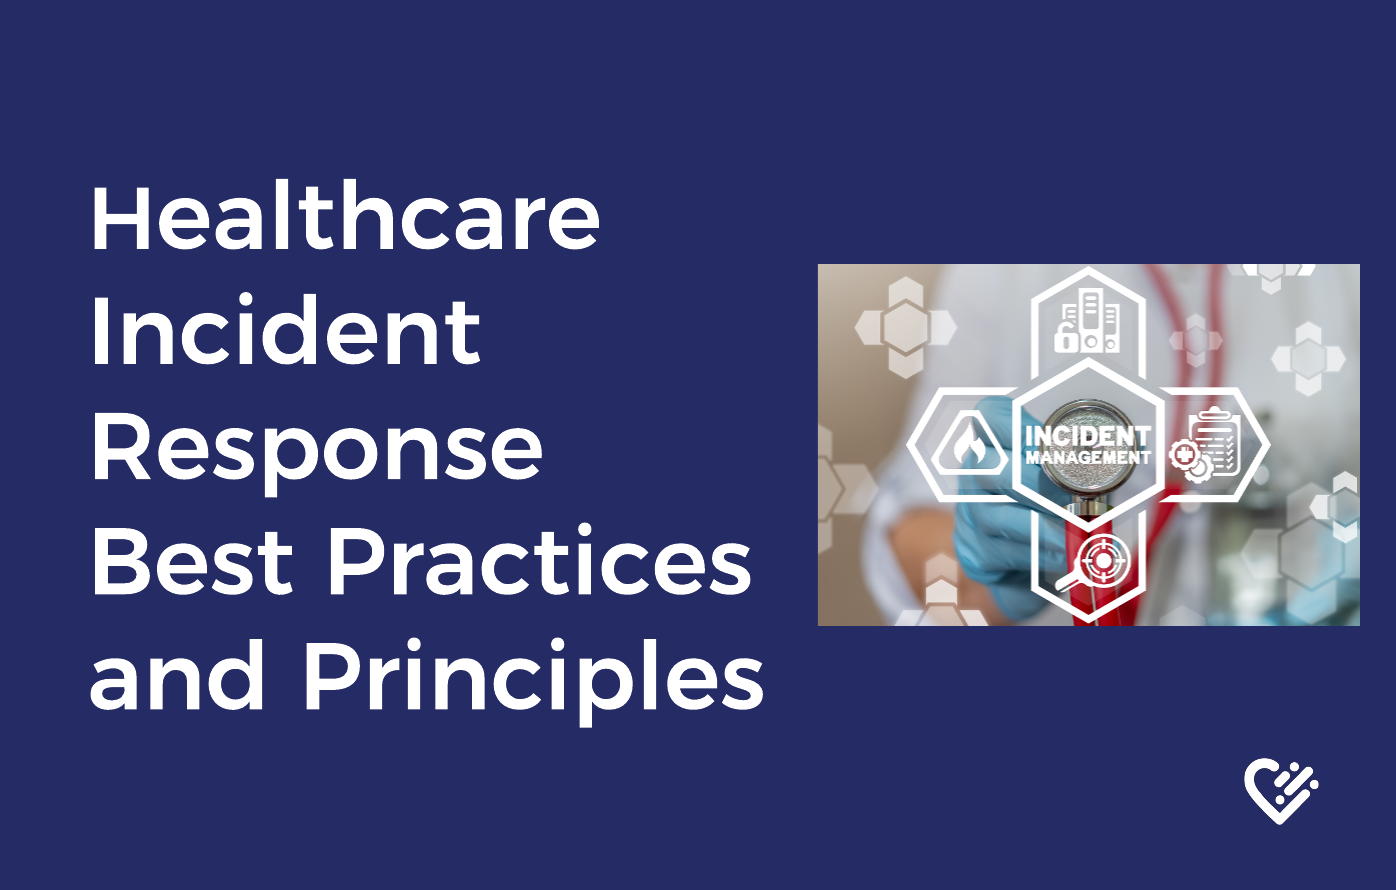 Healthcare Incident Response Best Practices and Principles